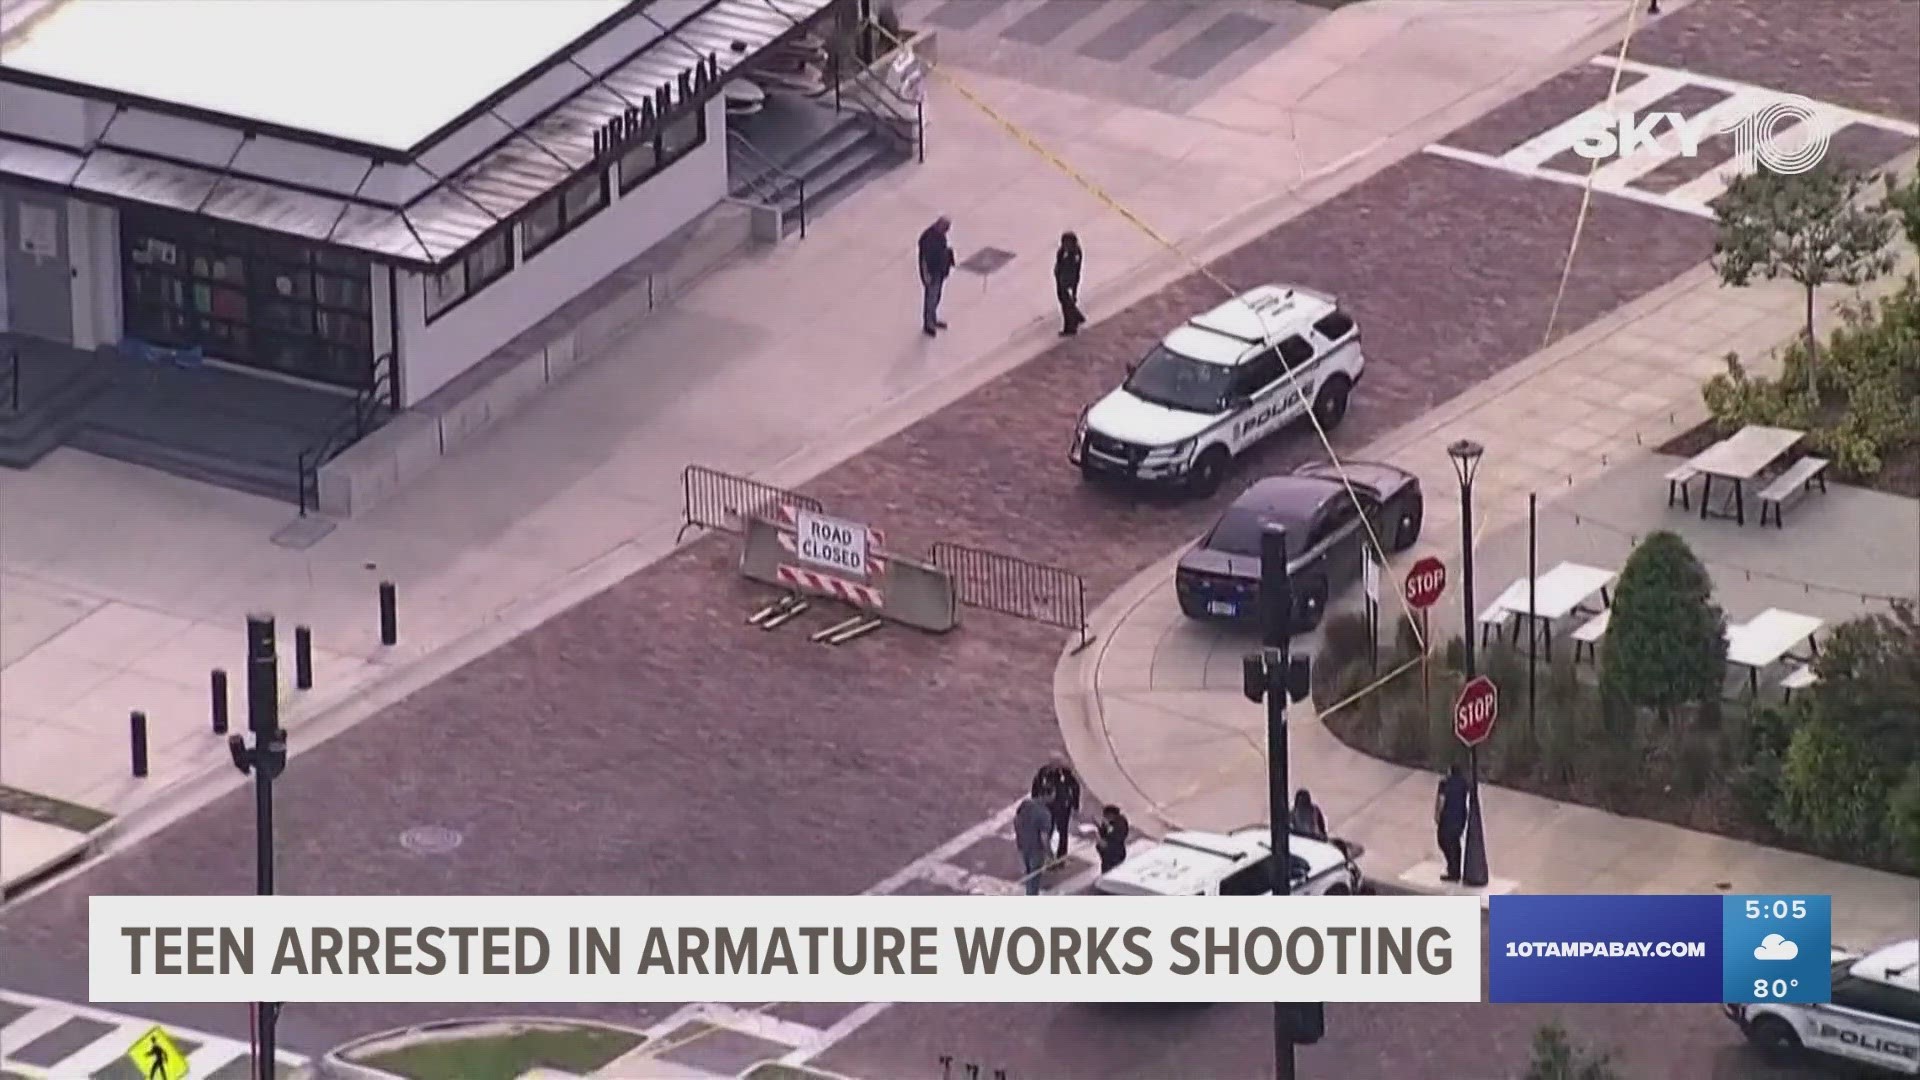 Three innocent bystanders were among the four shot on Tuesday near Armature Works in Tampa.